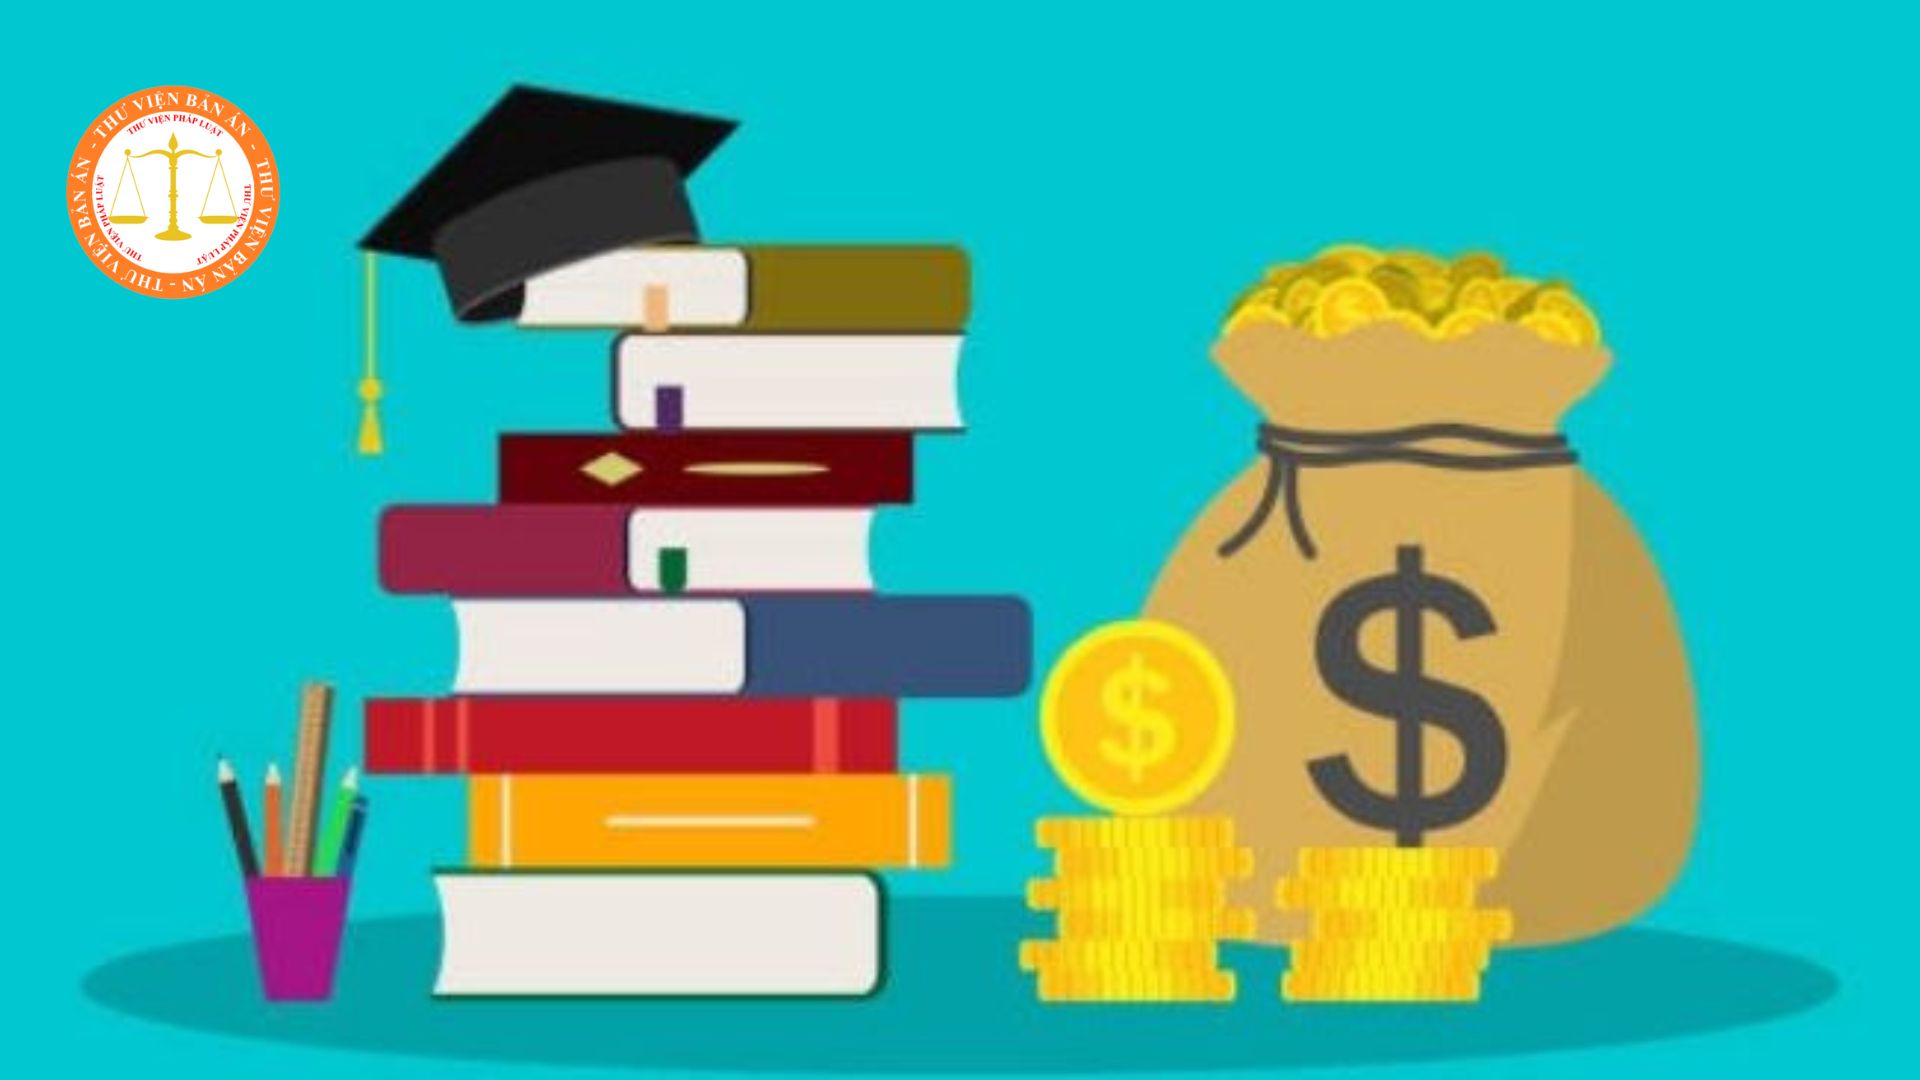 Policies on tuition reduction, exemption, studying cost financing, and tuition financing in Vietnam